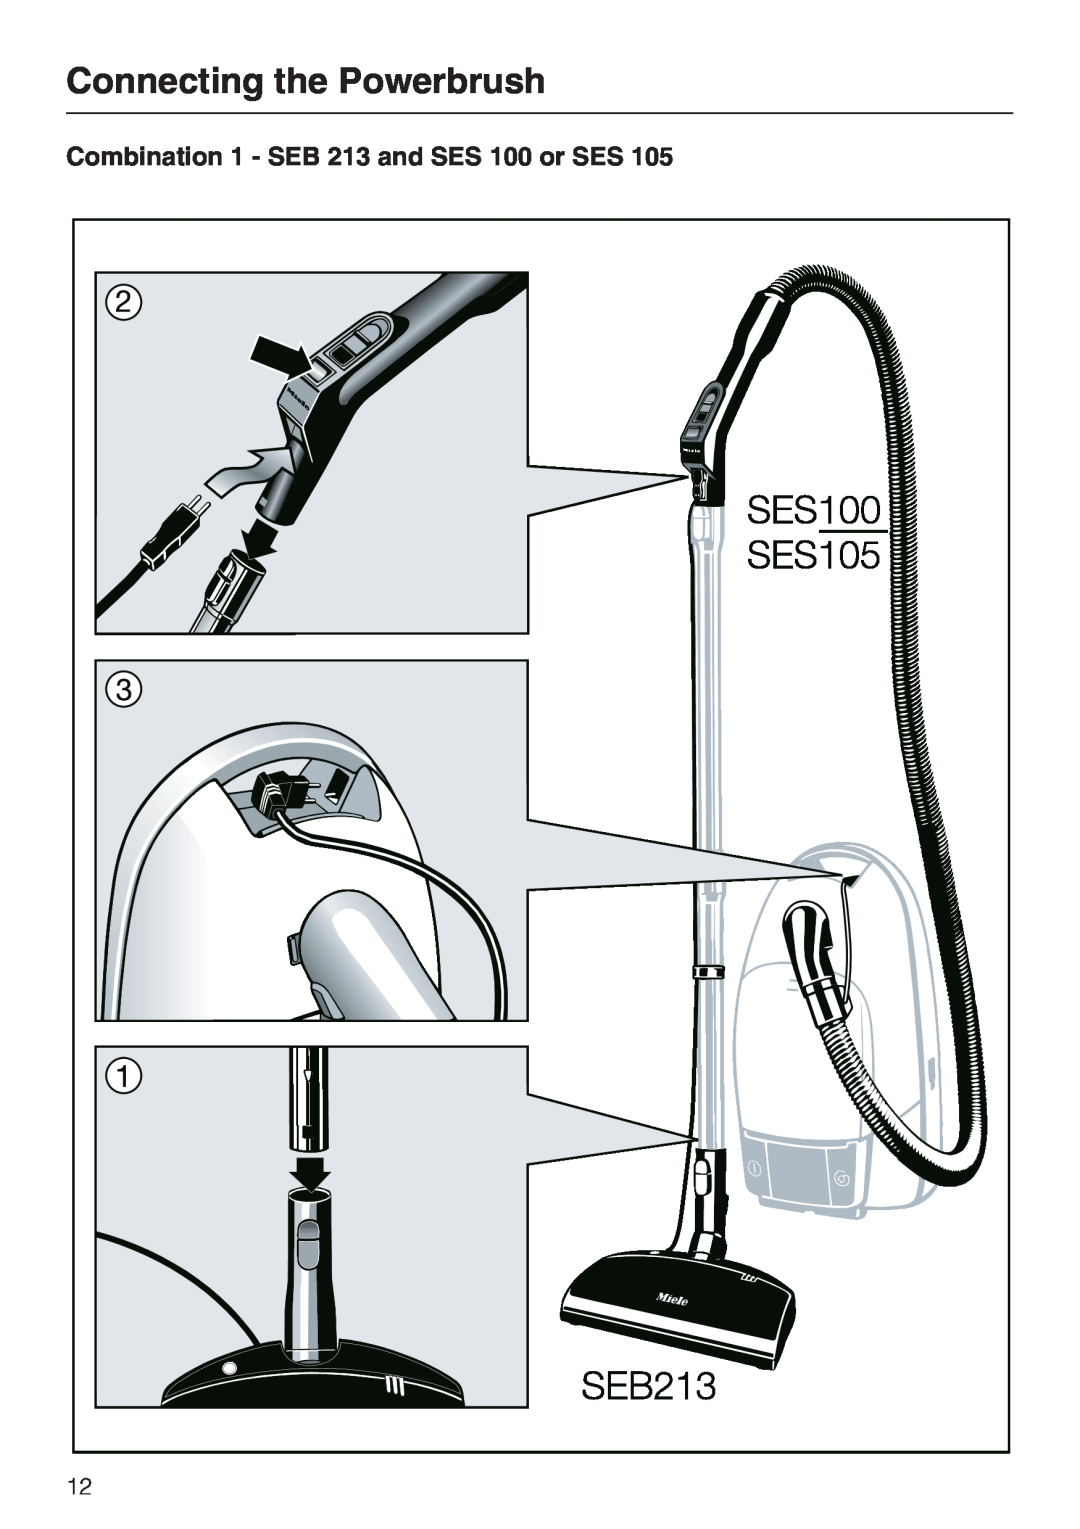 Miele 217-3, 217-2, 213-2 operating instructions Connecting the Powerbrush, Combination 1 - SEB 213 and SES 100 or SES 